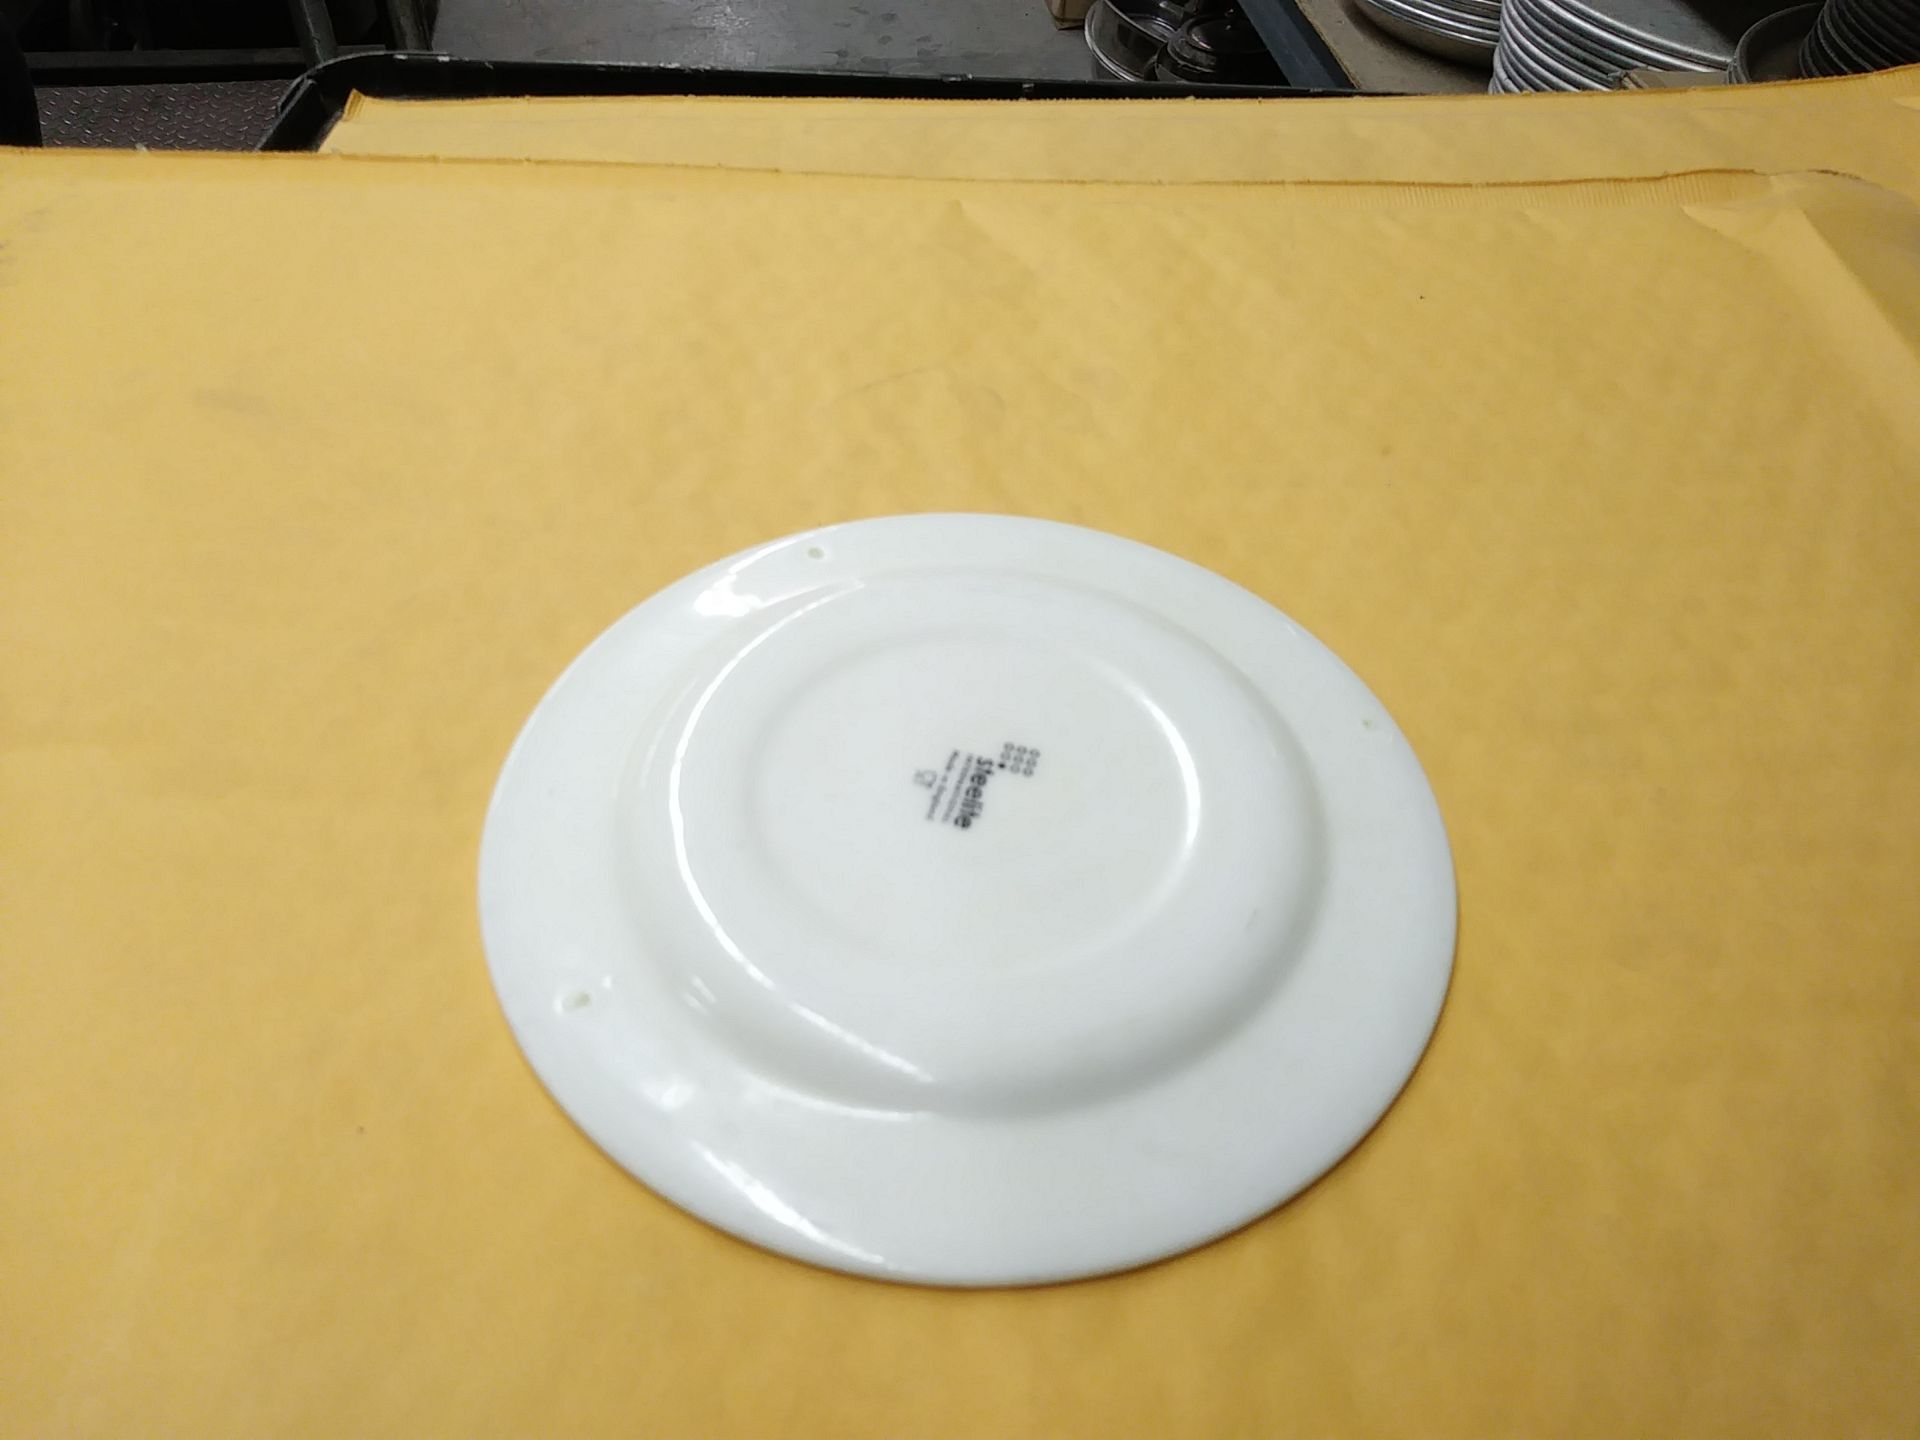 6" STEELITE PLATE (includes QTY 55 in this lot) - Image 2 of 2